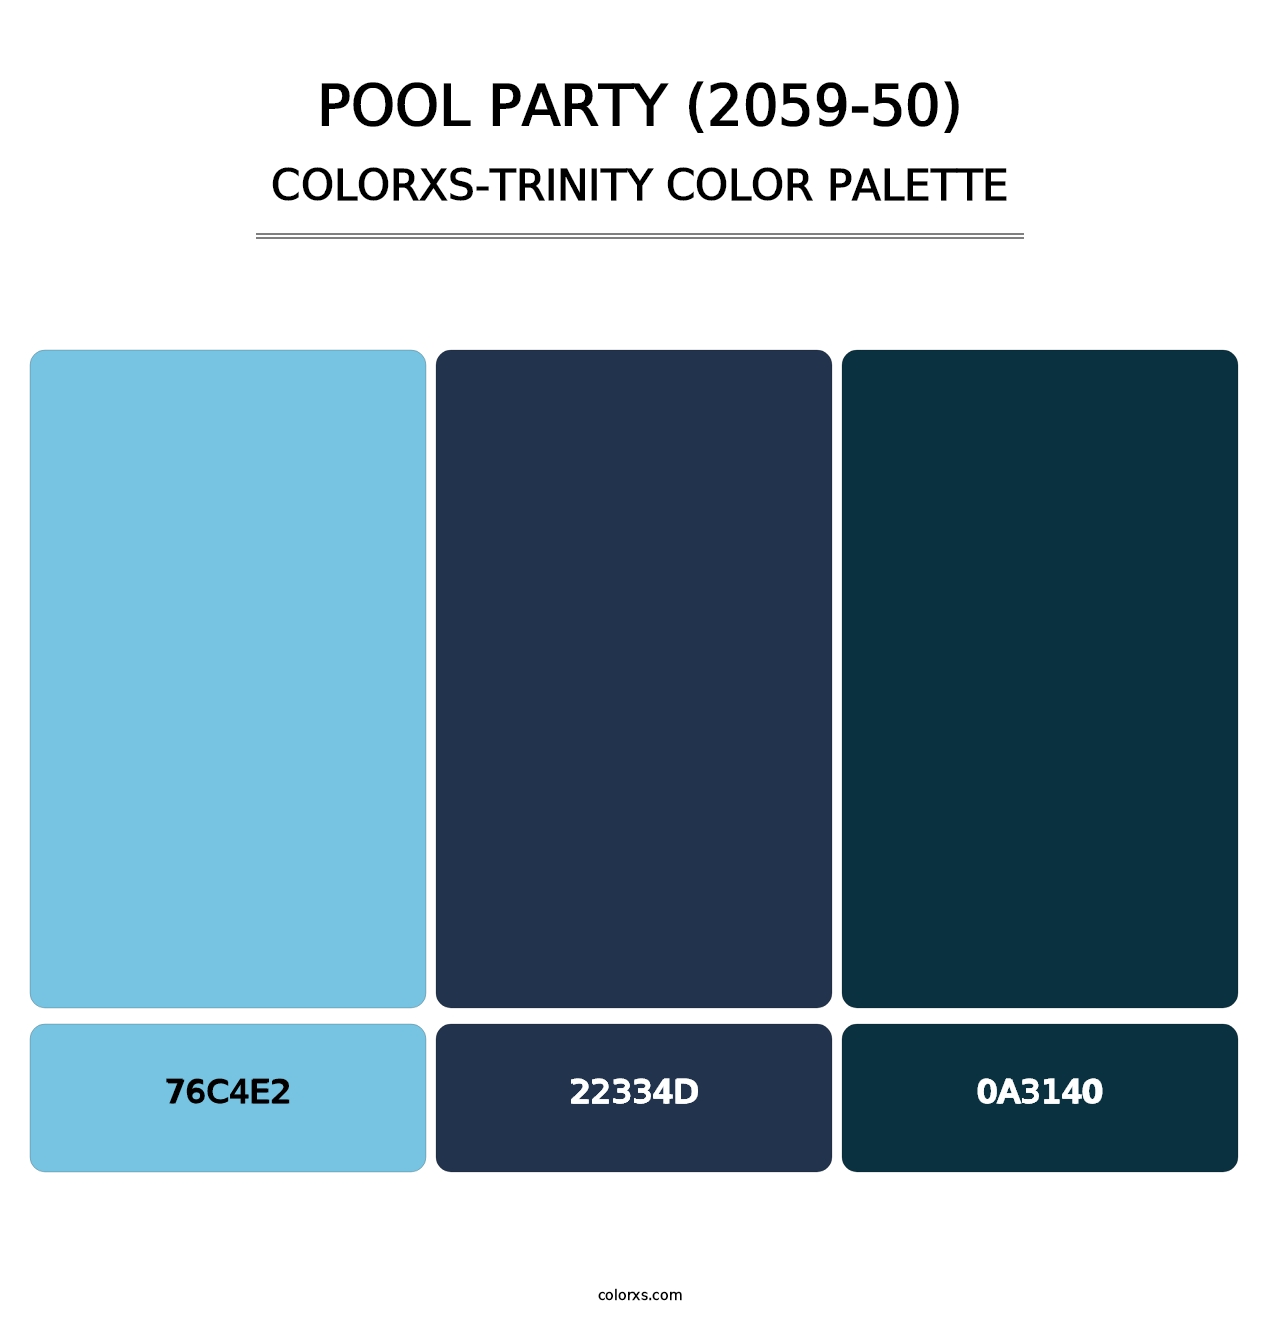 Pool Party (2059-50) - Colorxs Trinity Palette